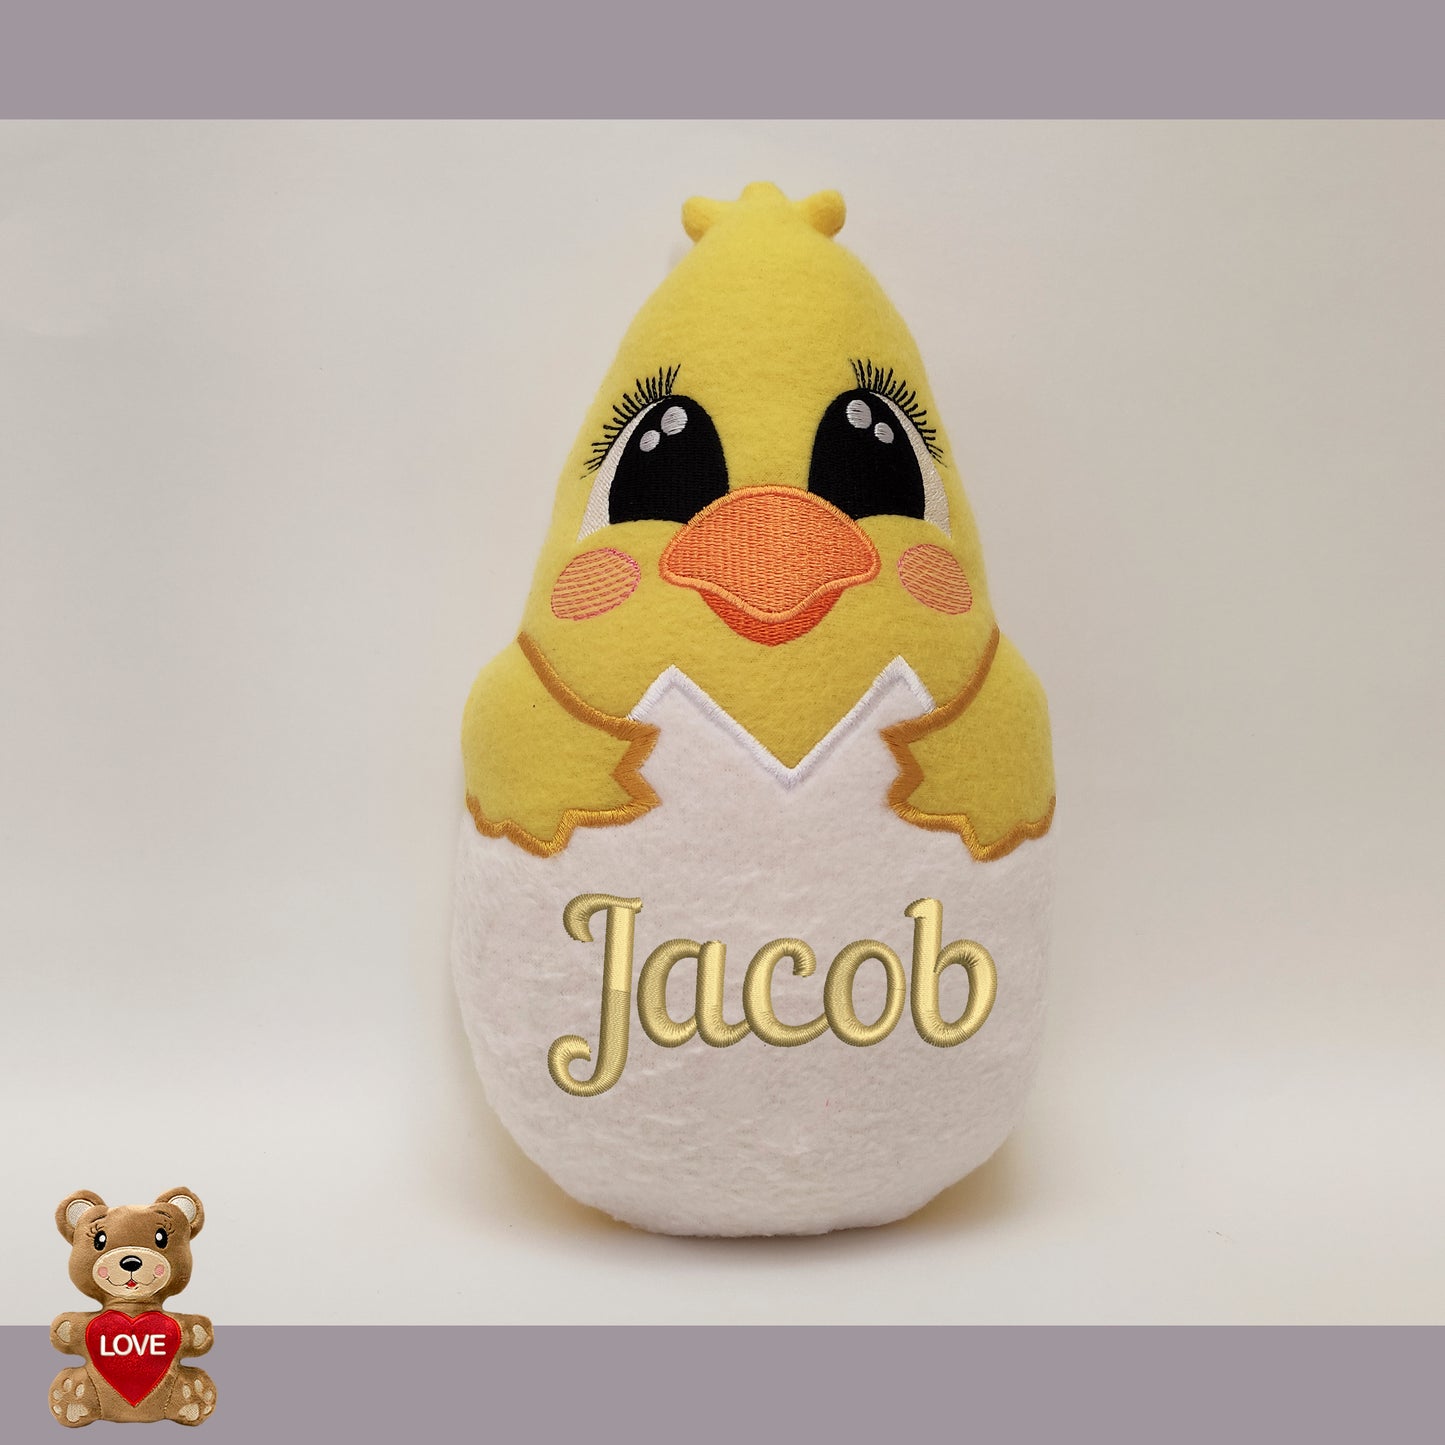 Personalised Cute Chicken Stuffed toy ,Super cute personalised soft plush toy, Personalised Gift, Unique Personalized Birthday Gifts , Custom Gifts For Children